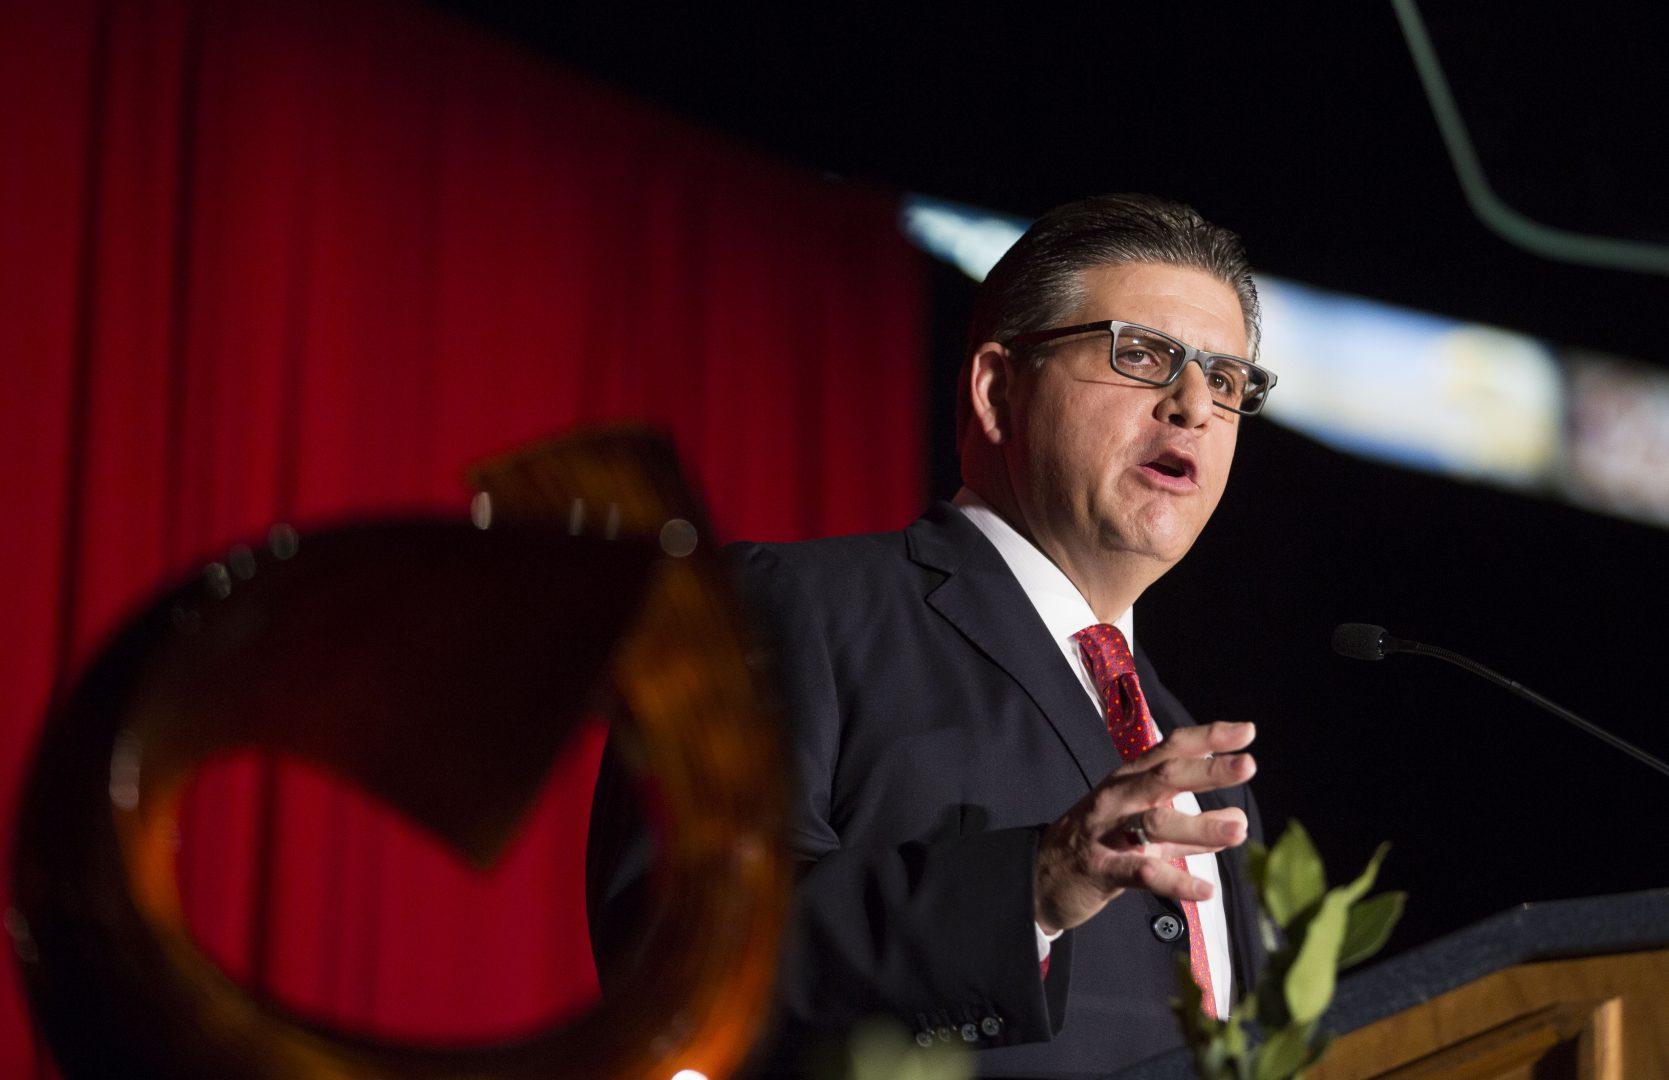 Fresno State President Joseph Castro delivers his speech highlighting the different achievements of Fresno State in the past year during the State of the University on Feb. 8, 2018. (Ram Reyes/The Collegian)